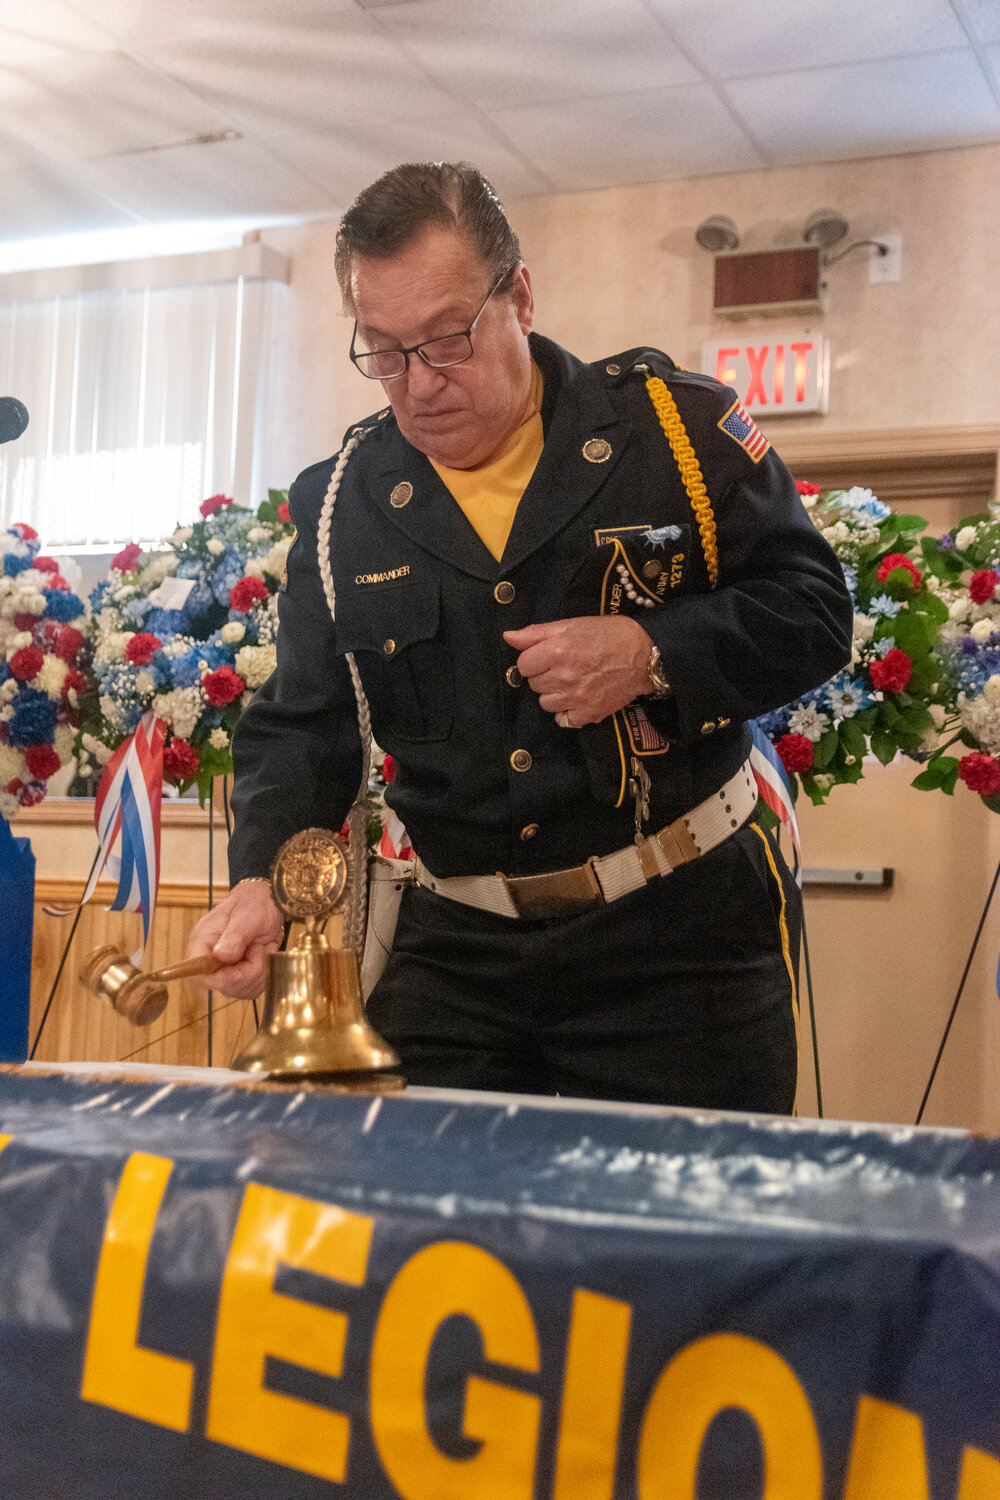 George Dibitetto ringing a bell at the Veteran’s Ceremony.